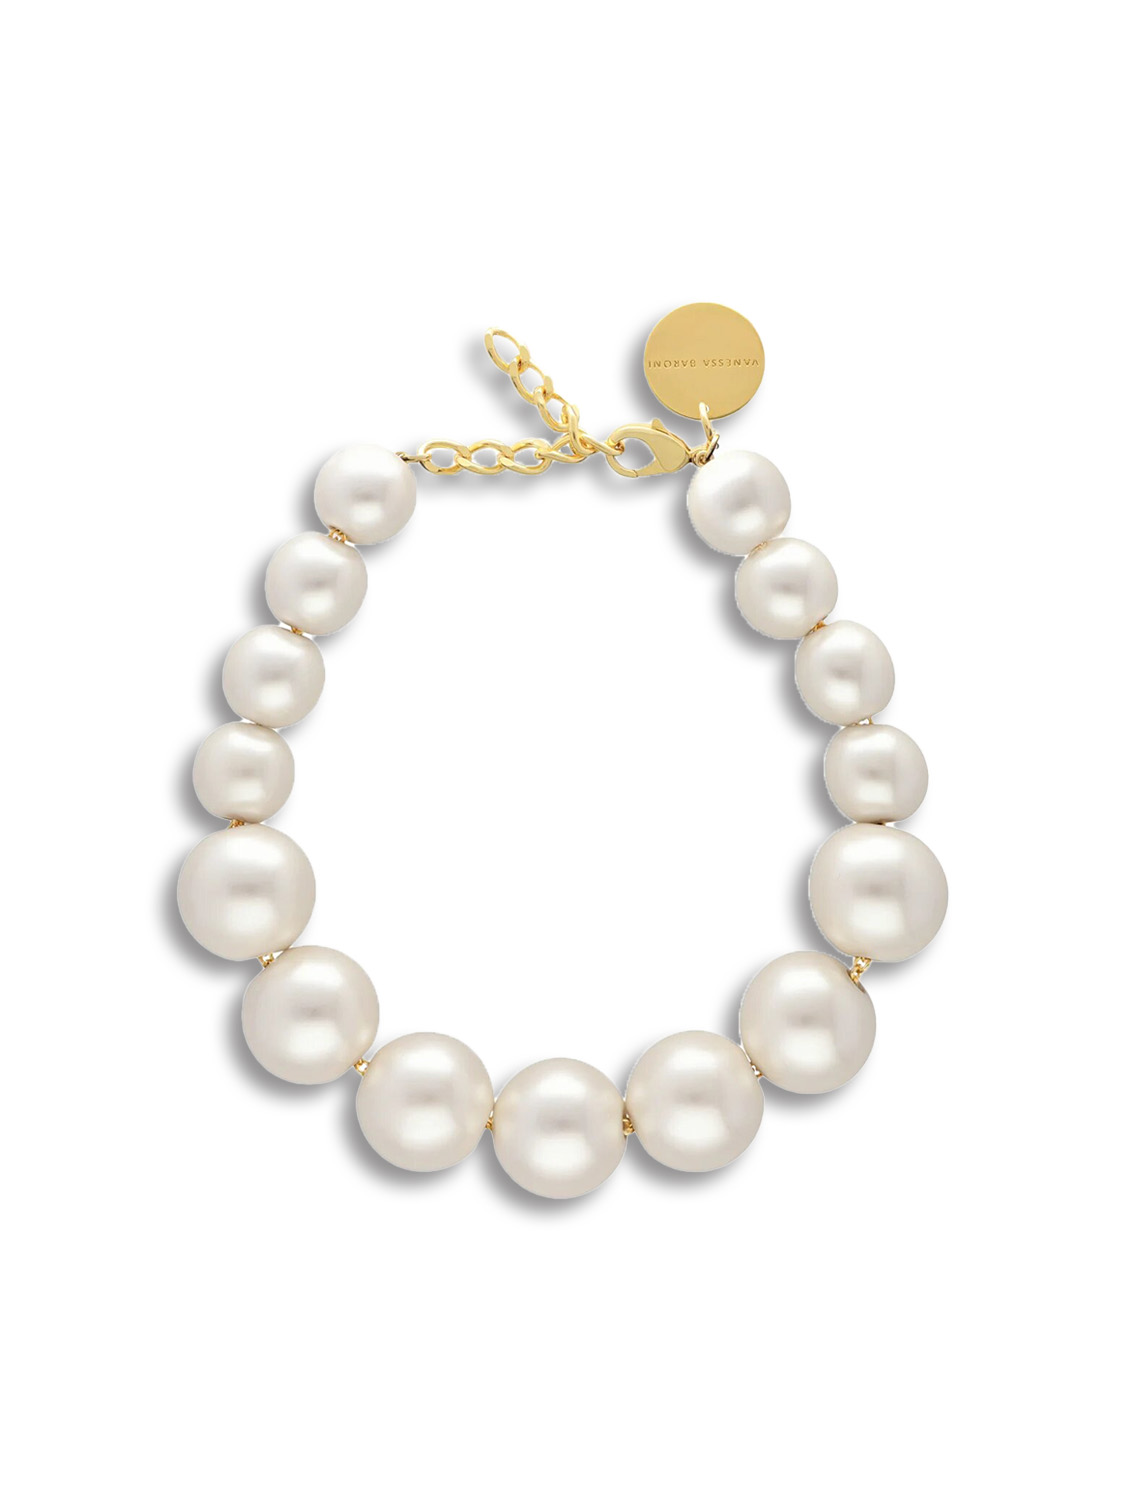 Beads Necklace Pearl - Necklace in ball design with pearl look